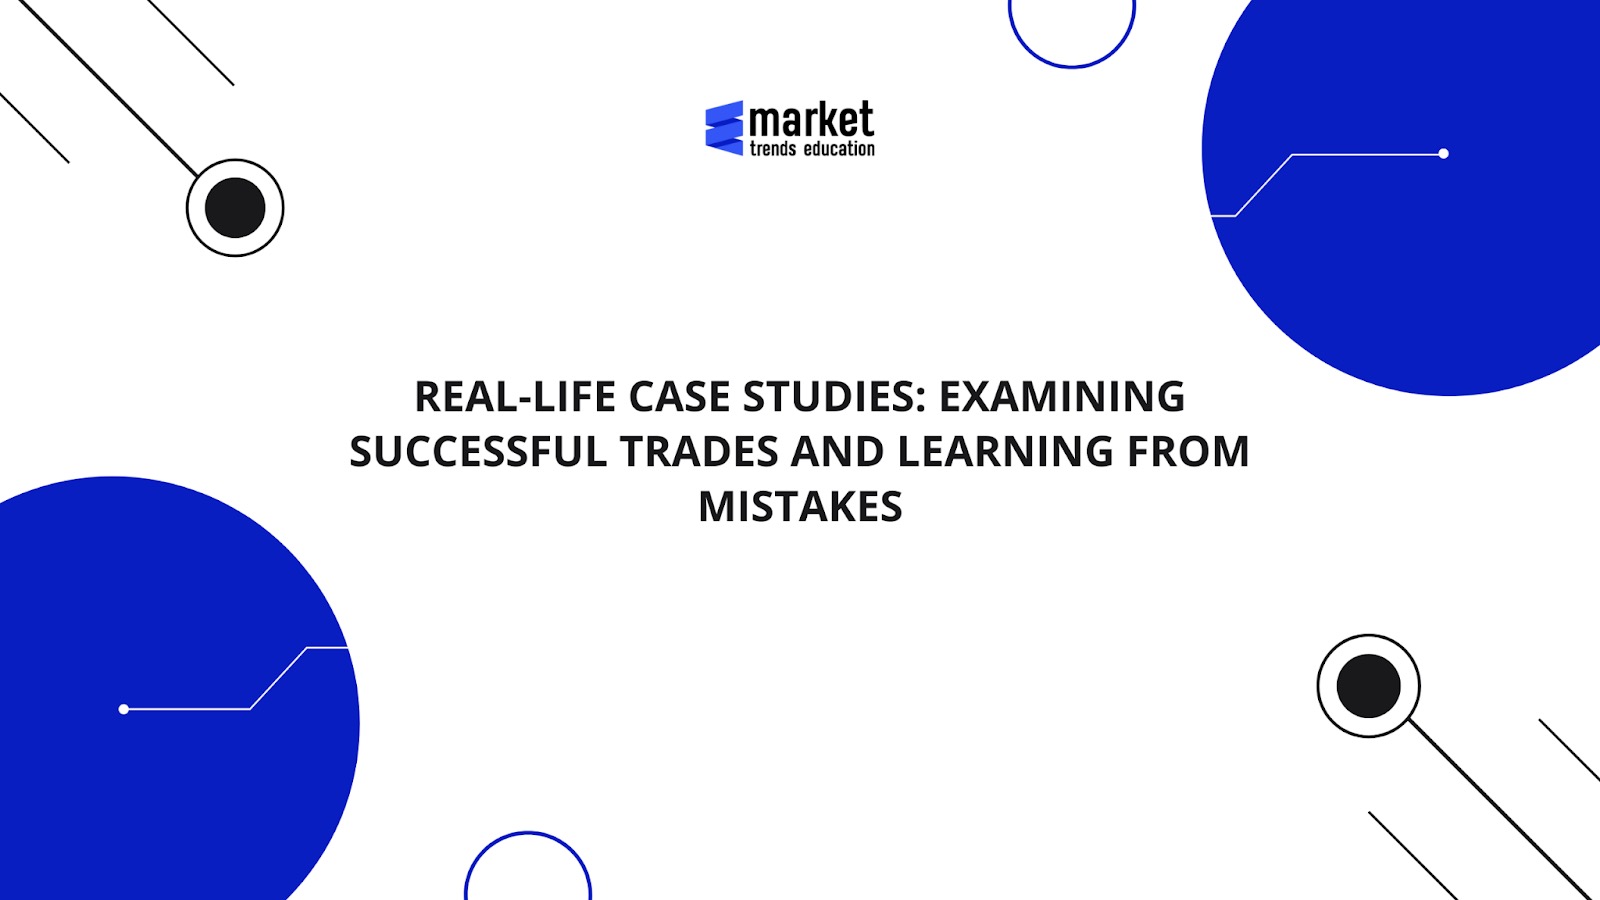 Real-Life Case Studies: Examining Successful Trades & Learning from Mistakes.